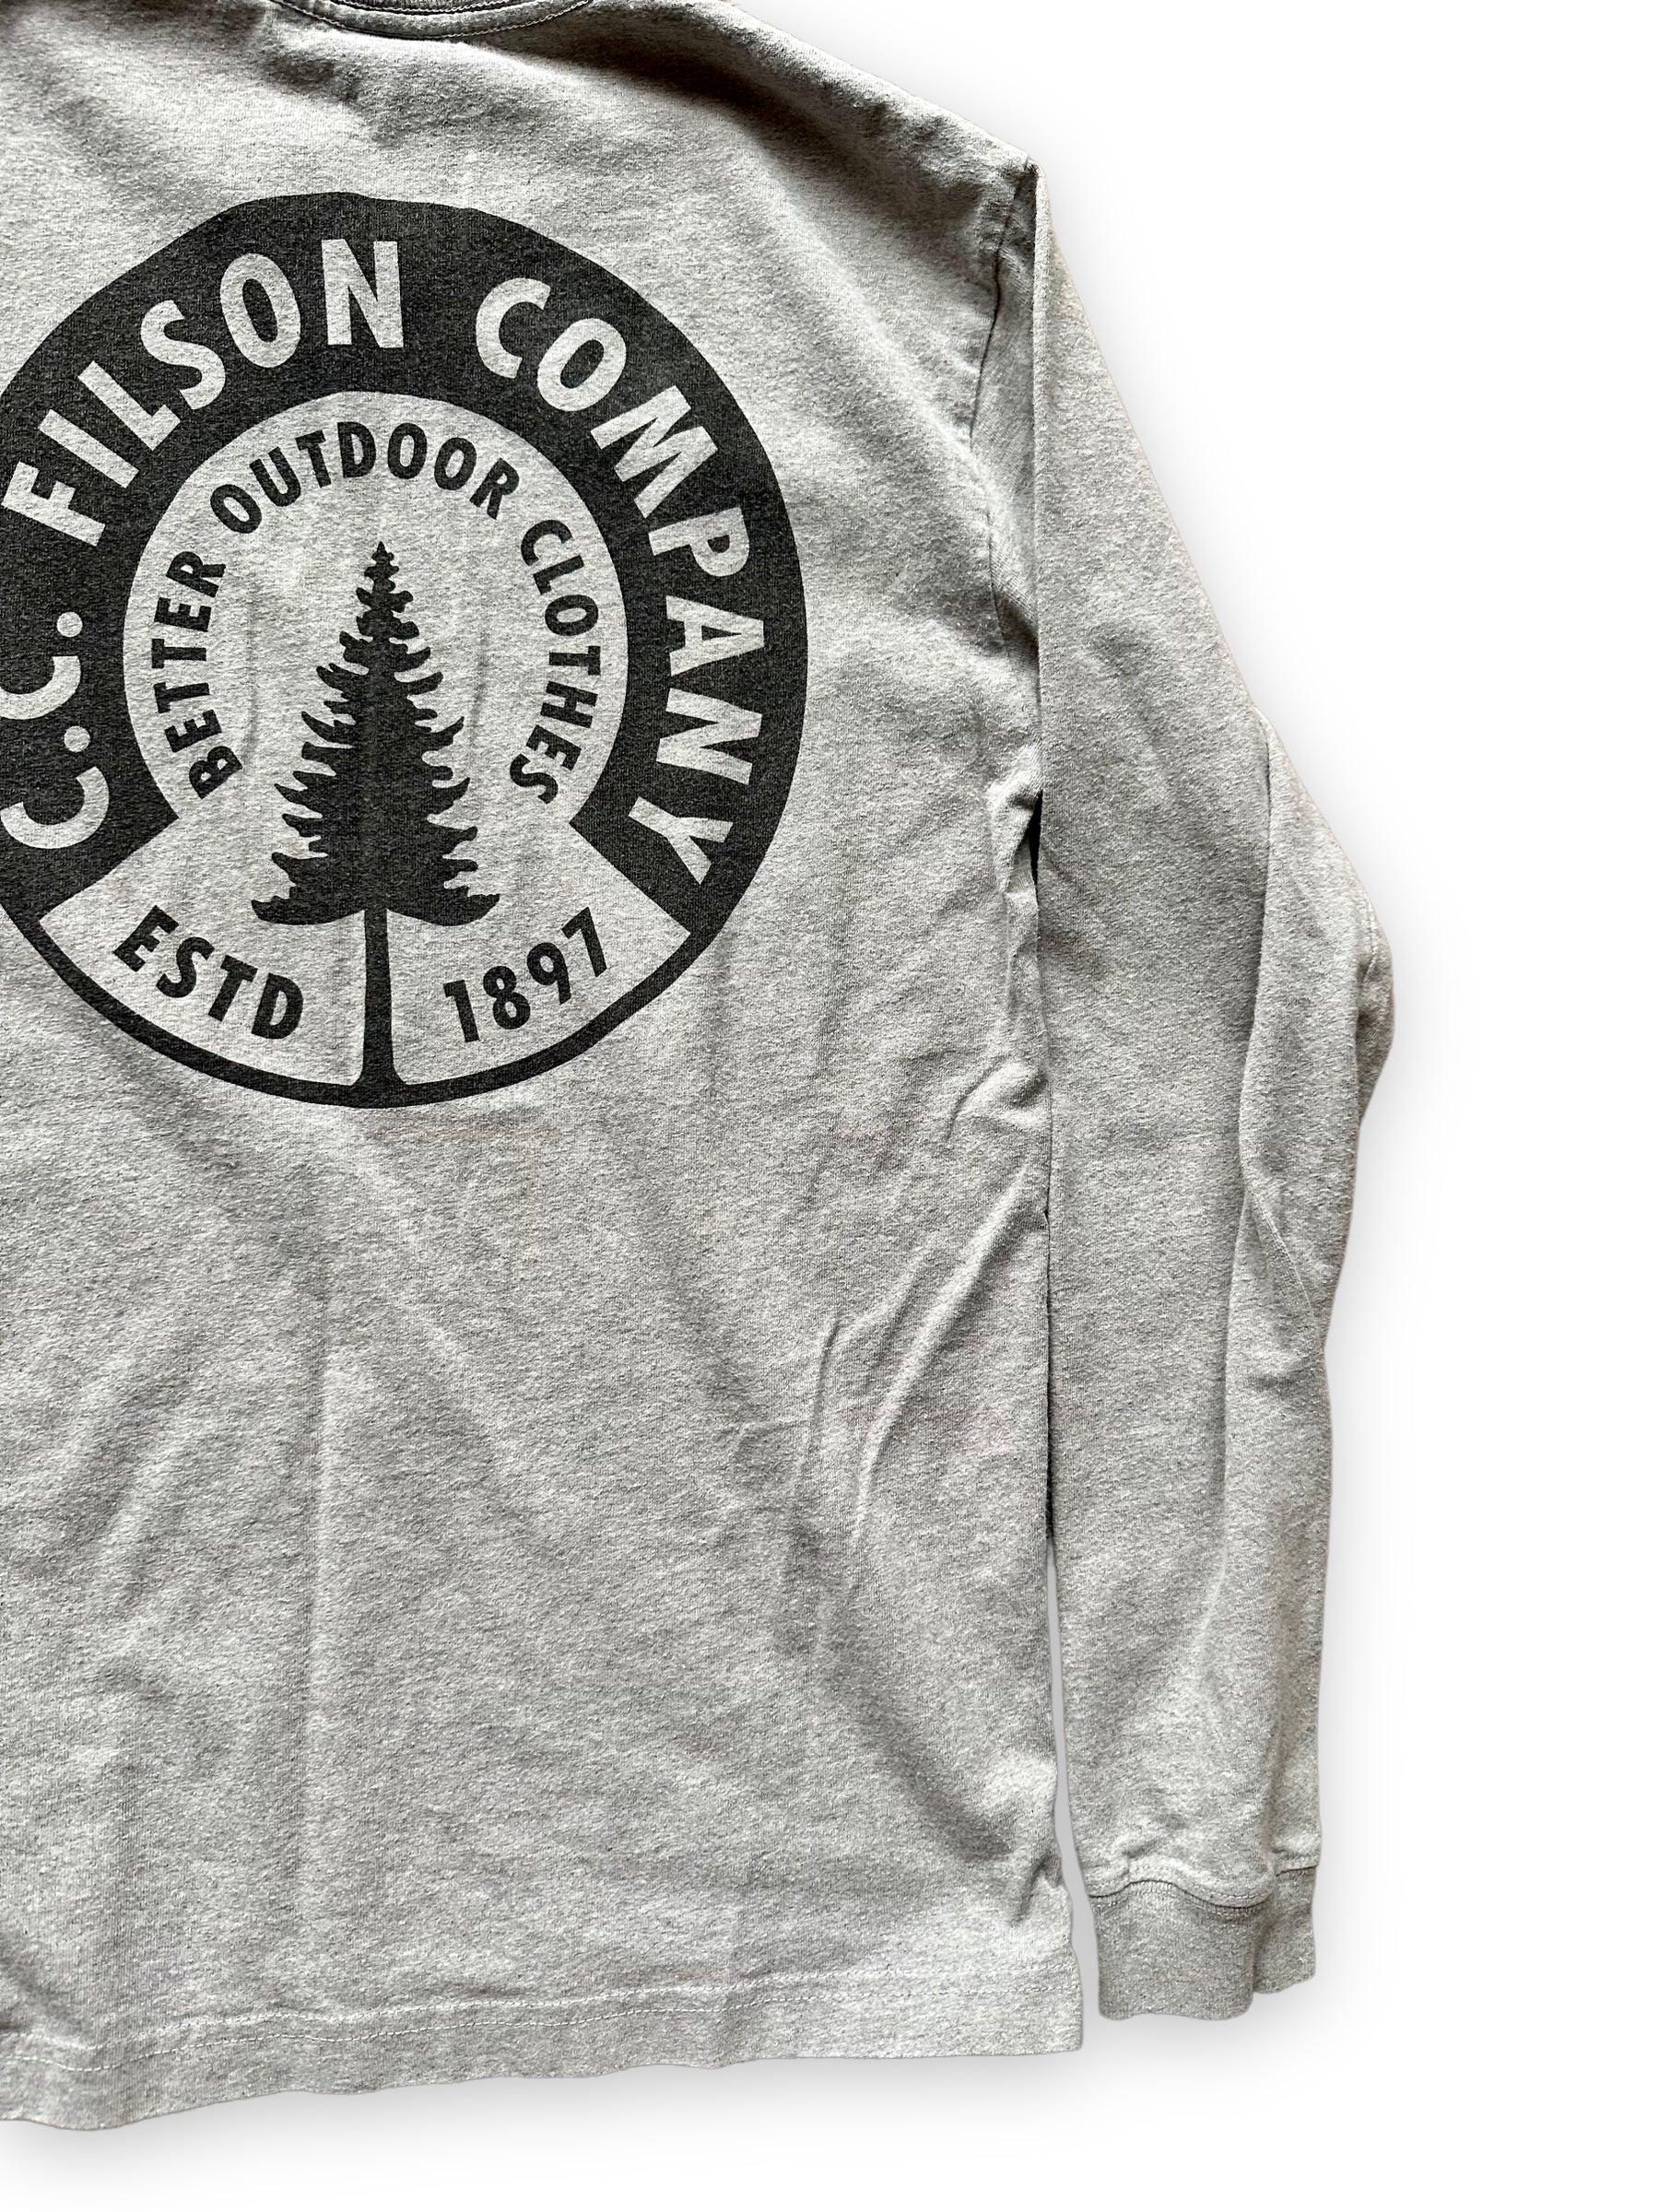 Right Rear View of Filson Long Sleeve Heather Grey Tee SZ XS  |  Barn Owl Vintage Goods | Filson Graphic Tees Seattle